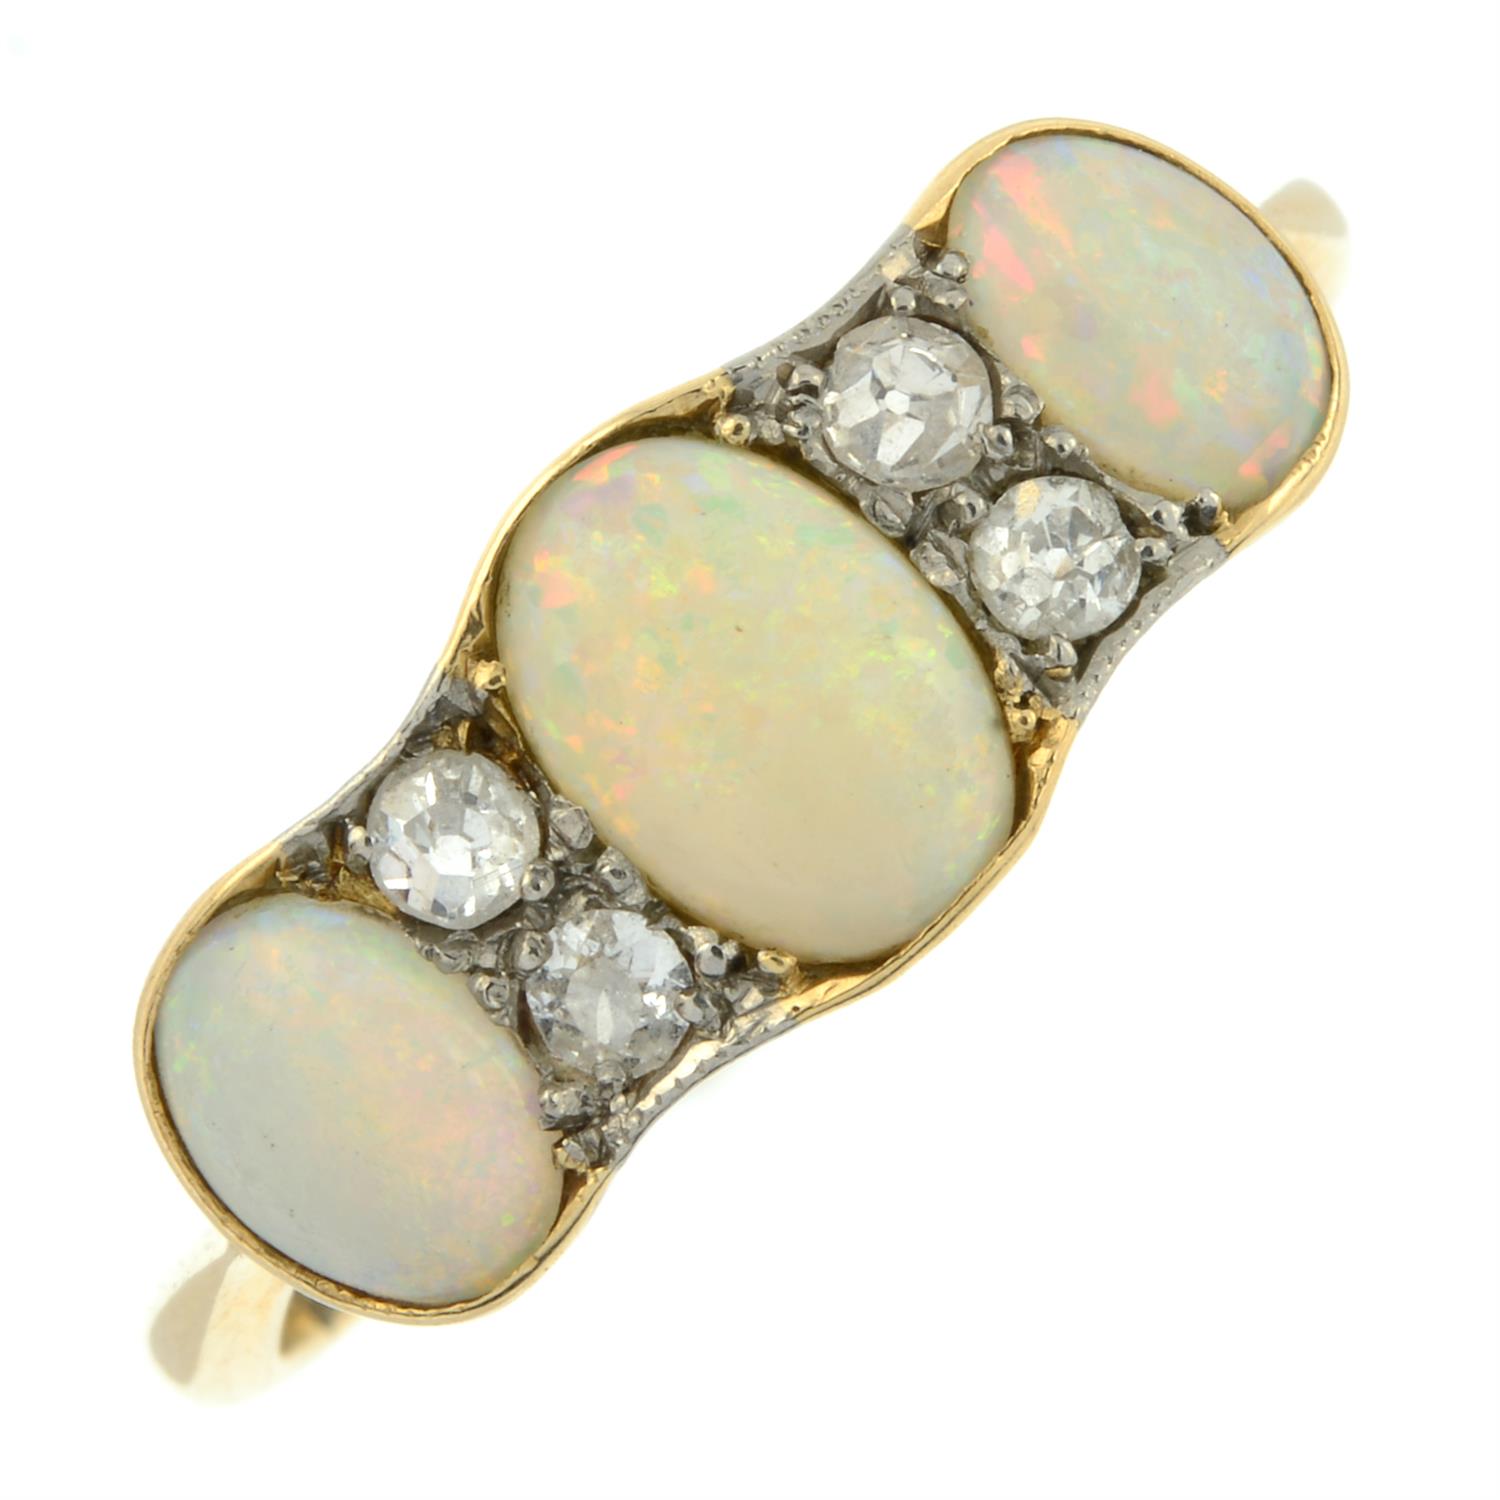 An early 20th century 18ct gold graduated opal three-stone ring, with single-cut diamond spacers. - Image 2 of 5